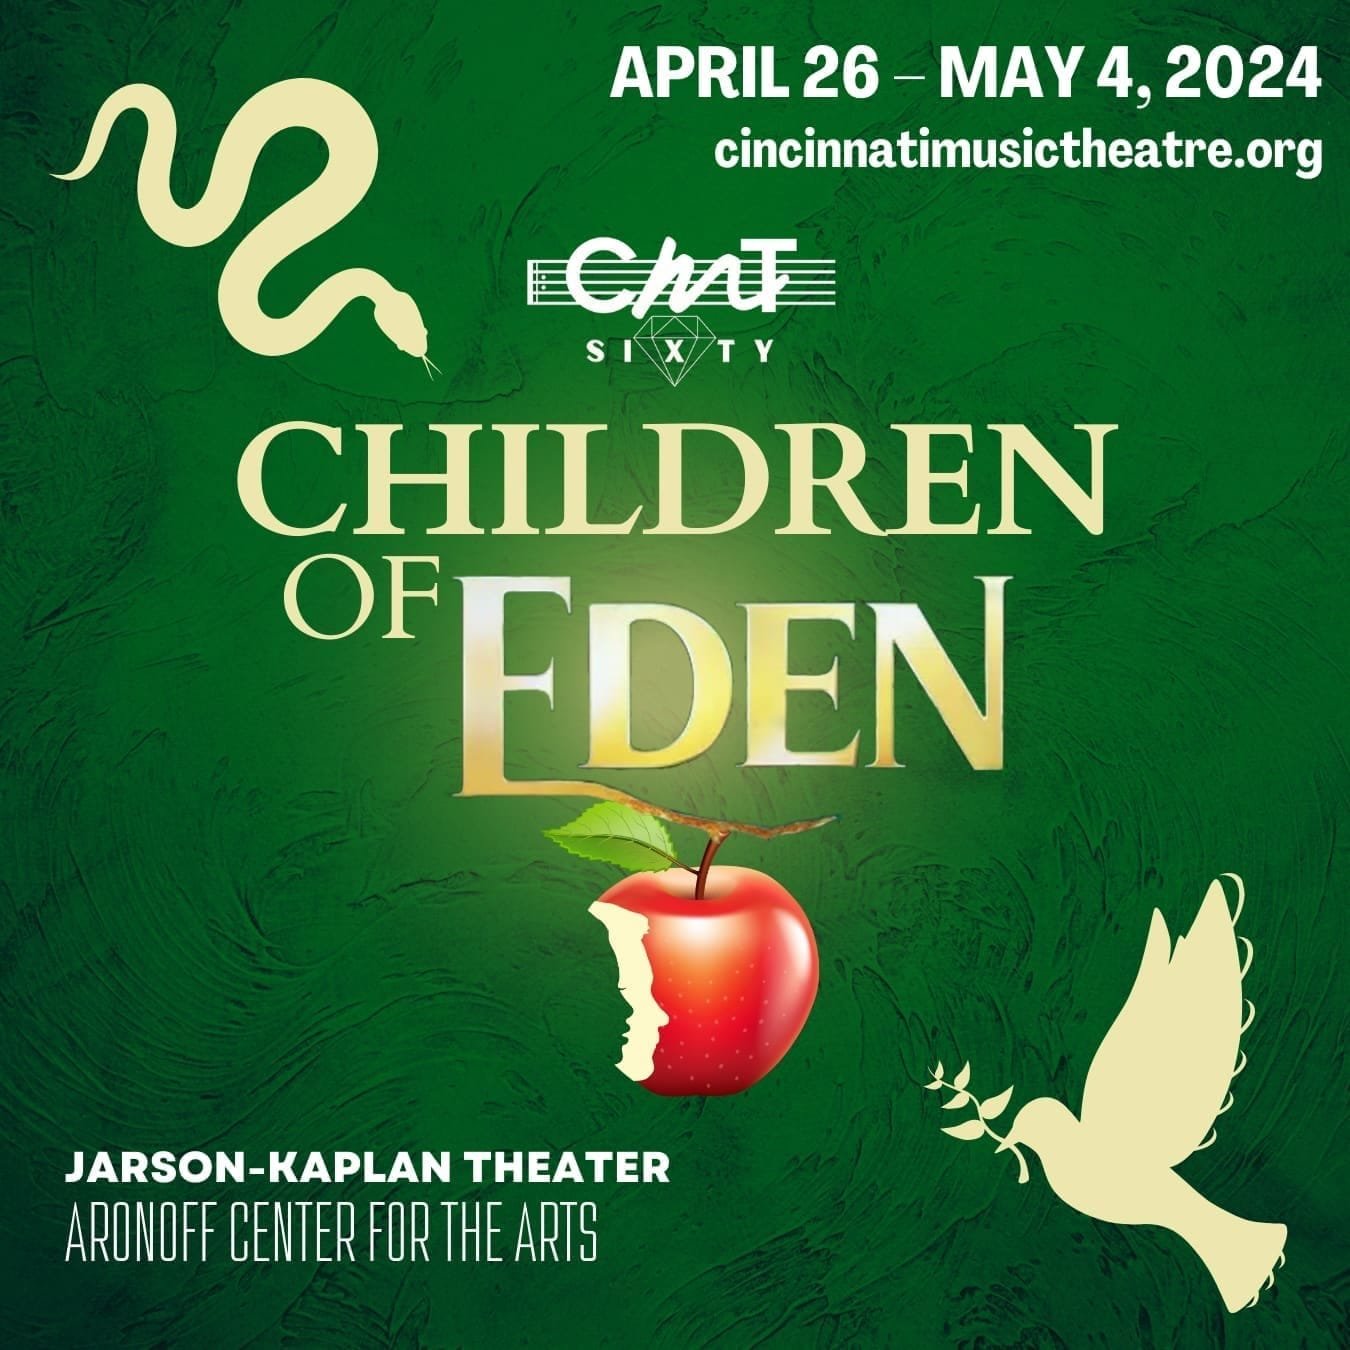 Break a leg to @alliekalfas (Mama)and the entire cast and crew of Cincinnati Music Theatre @cincinnatimusictheatre  production of CHILDREN OF EDEN. They open Friday, April 26 (tomorrow) and run through May 4. Performances are held in the Aronoff Cent